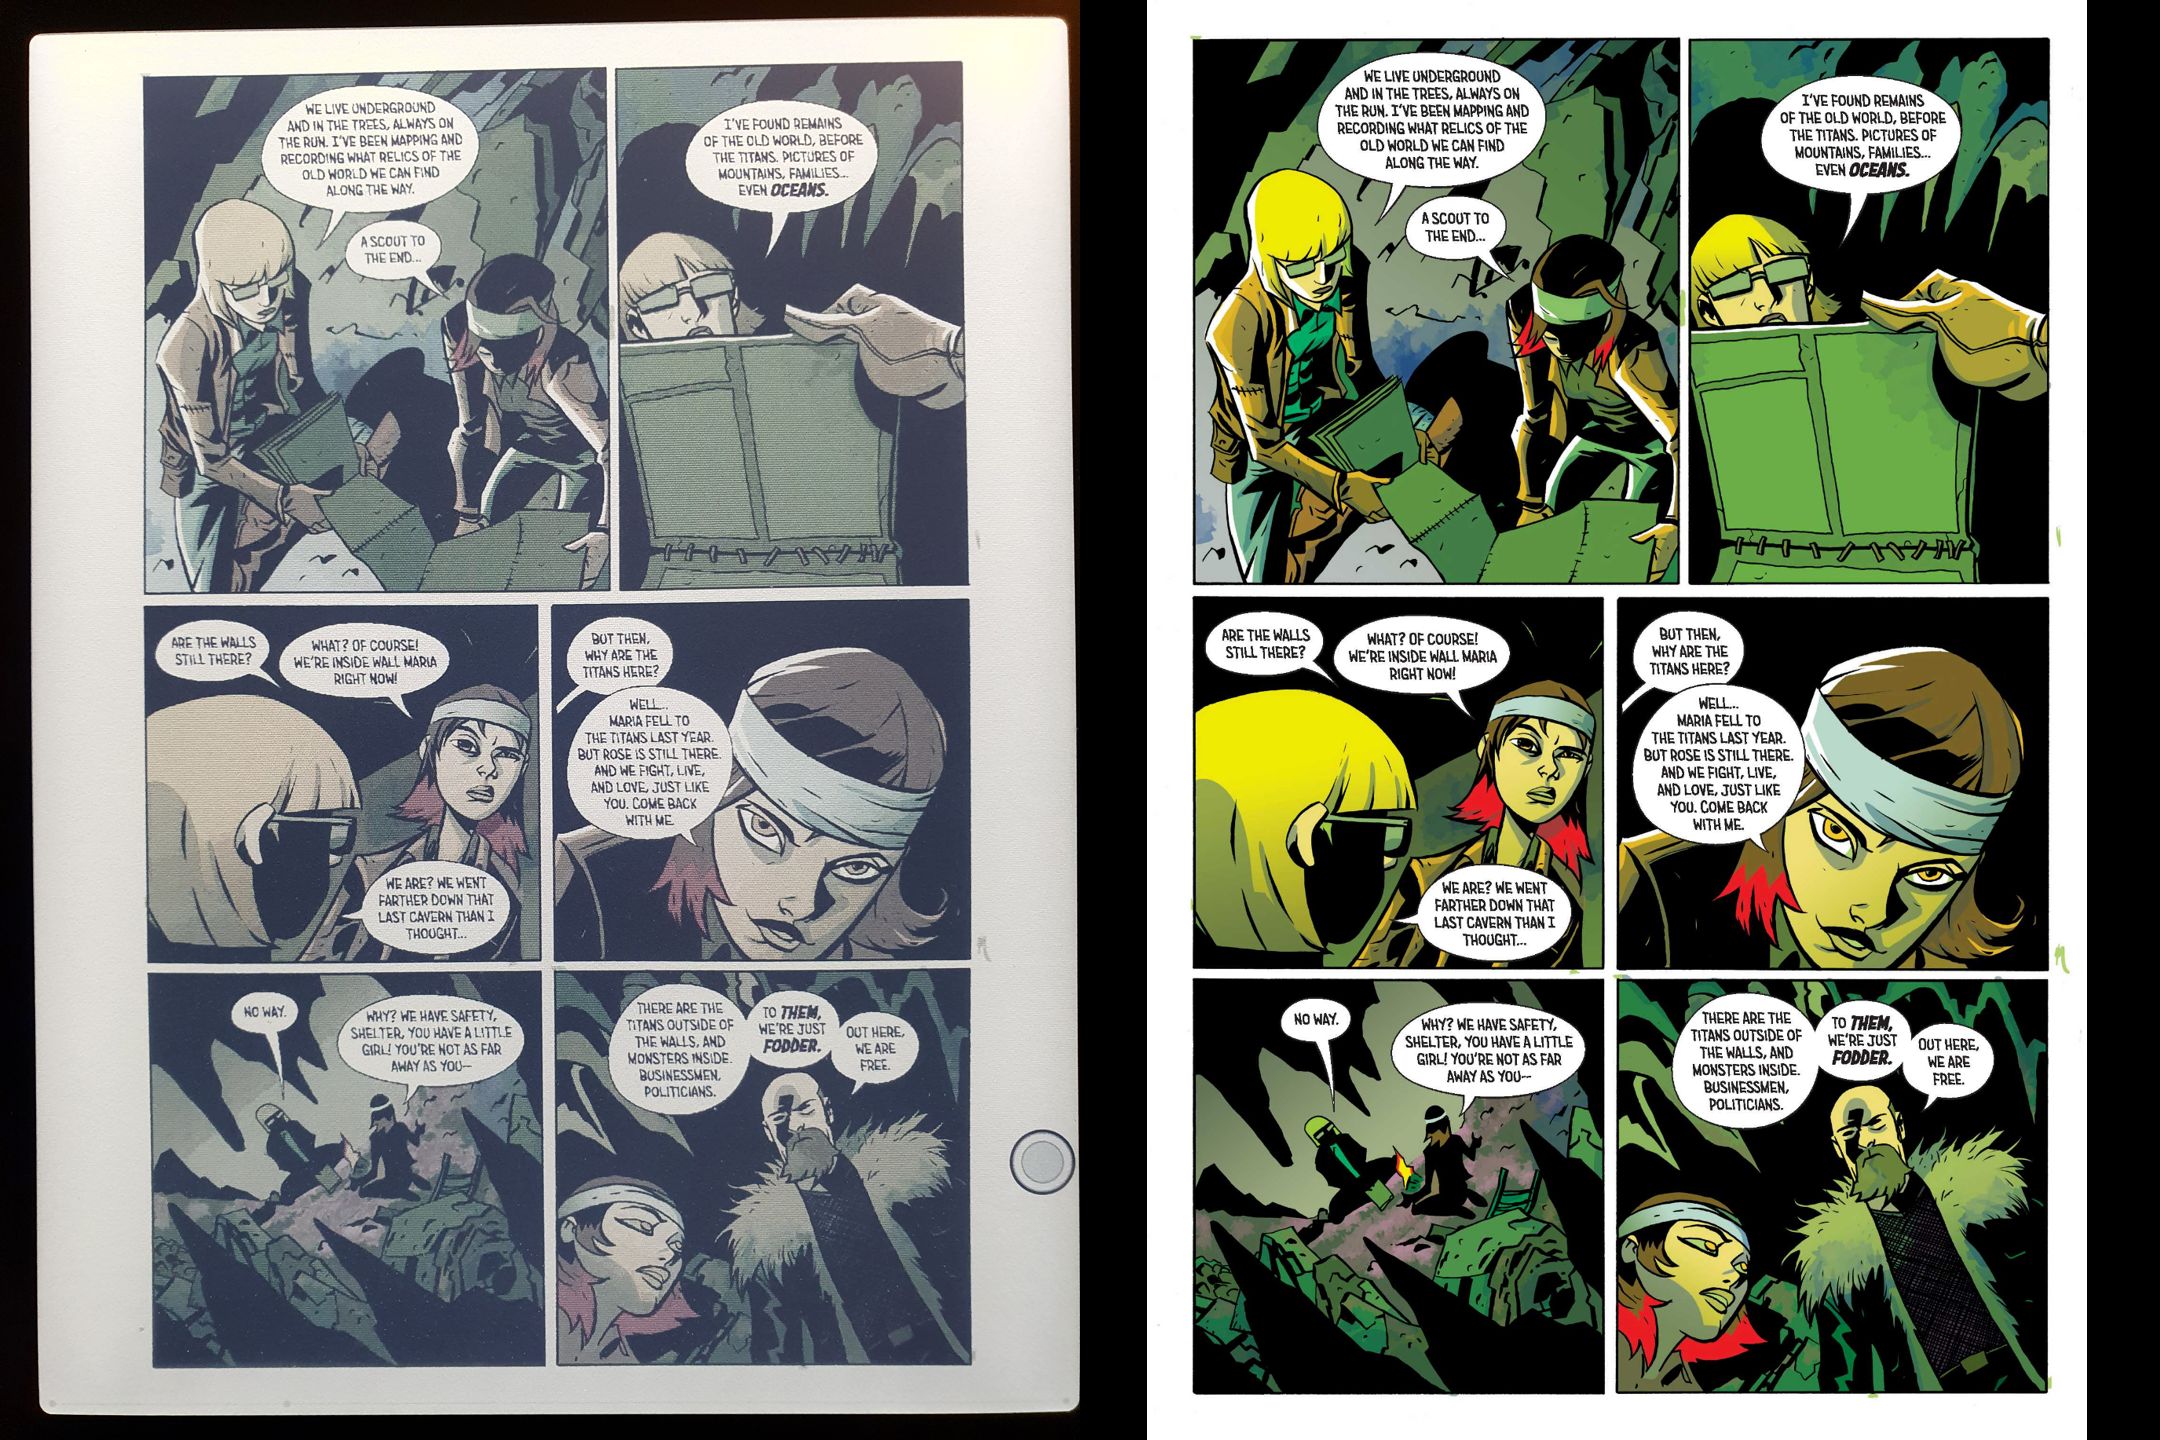 Side by side comparison of a page from a comic on the Nova and a screenshot of the CBZ.